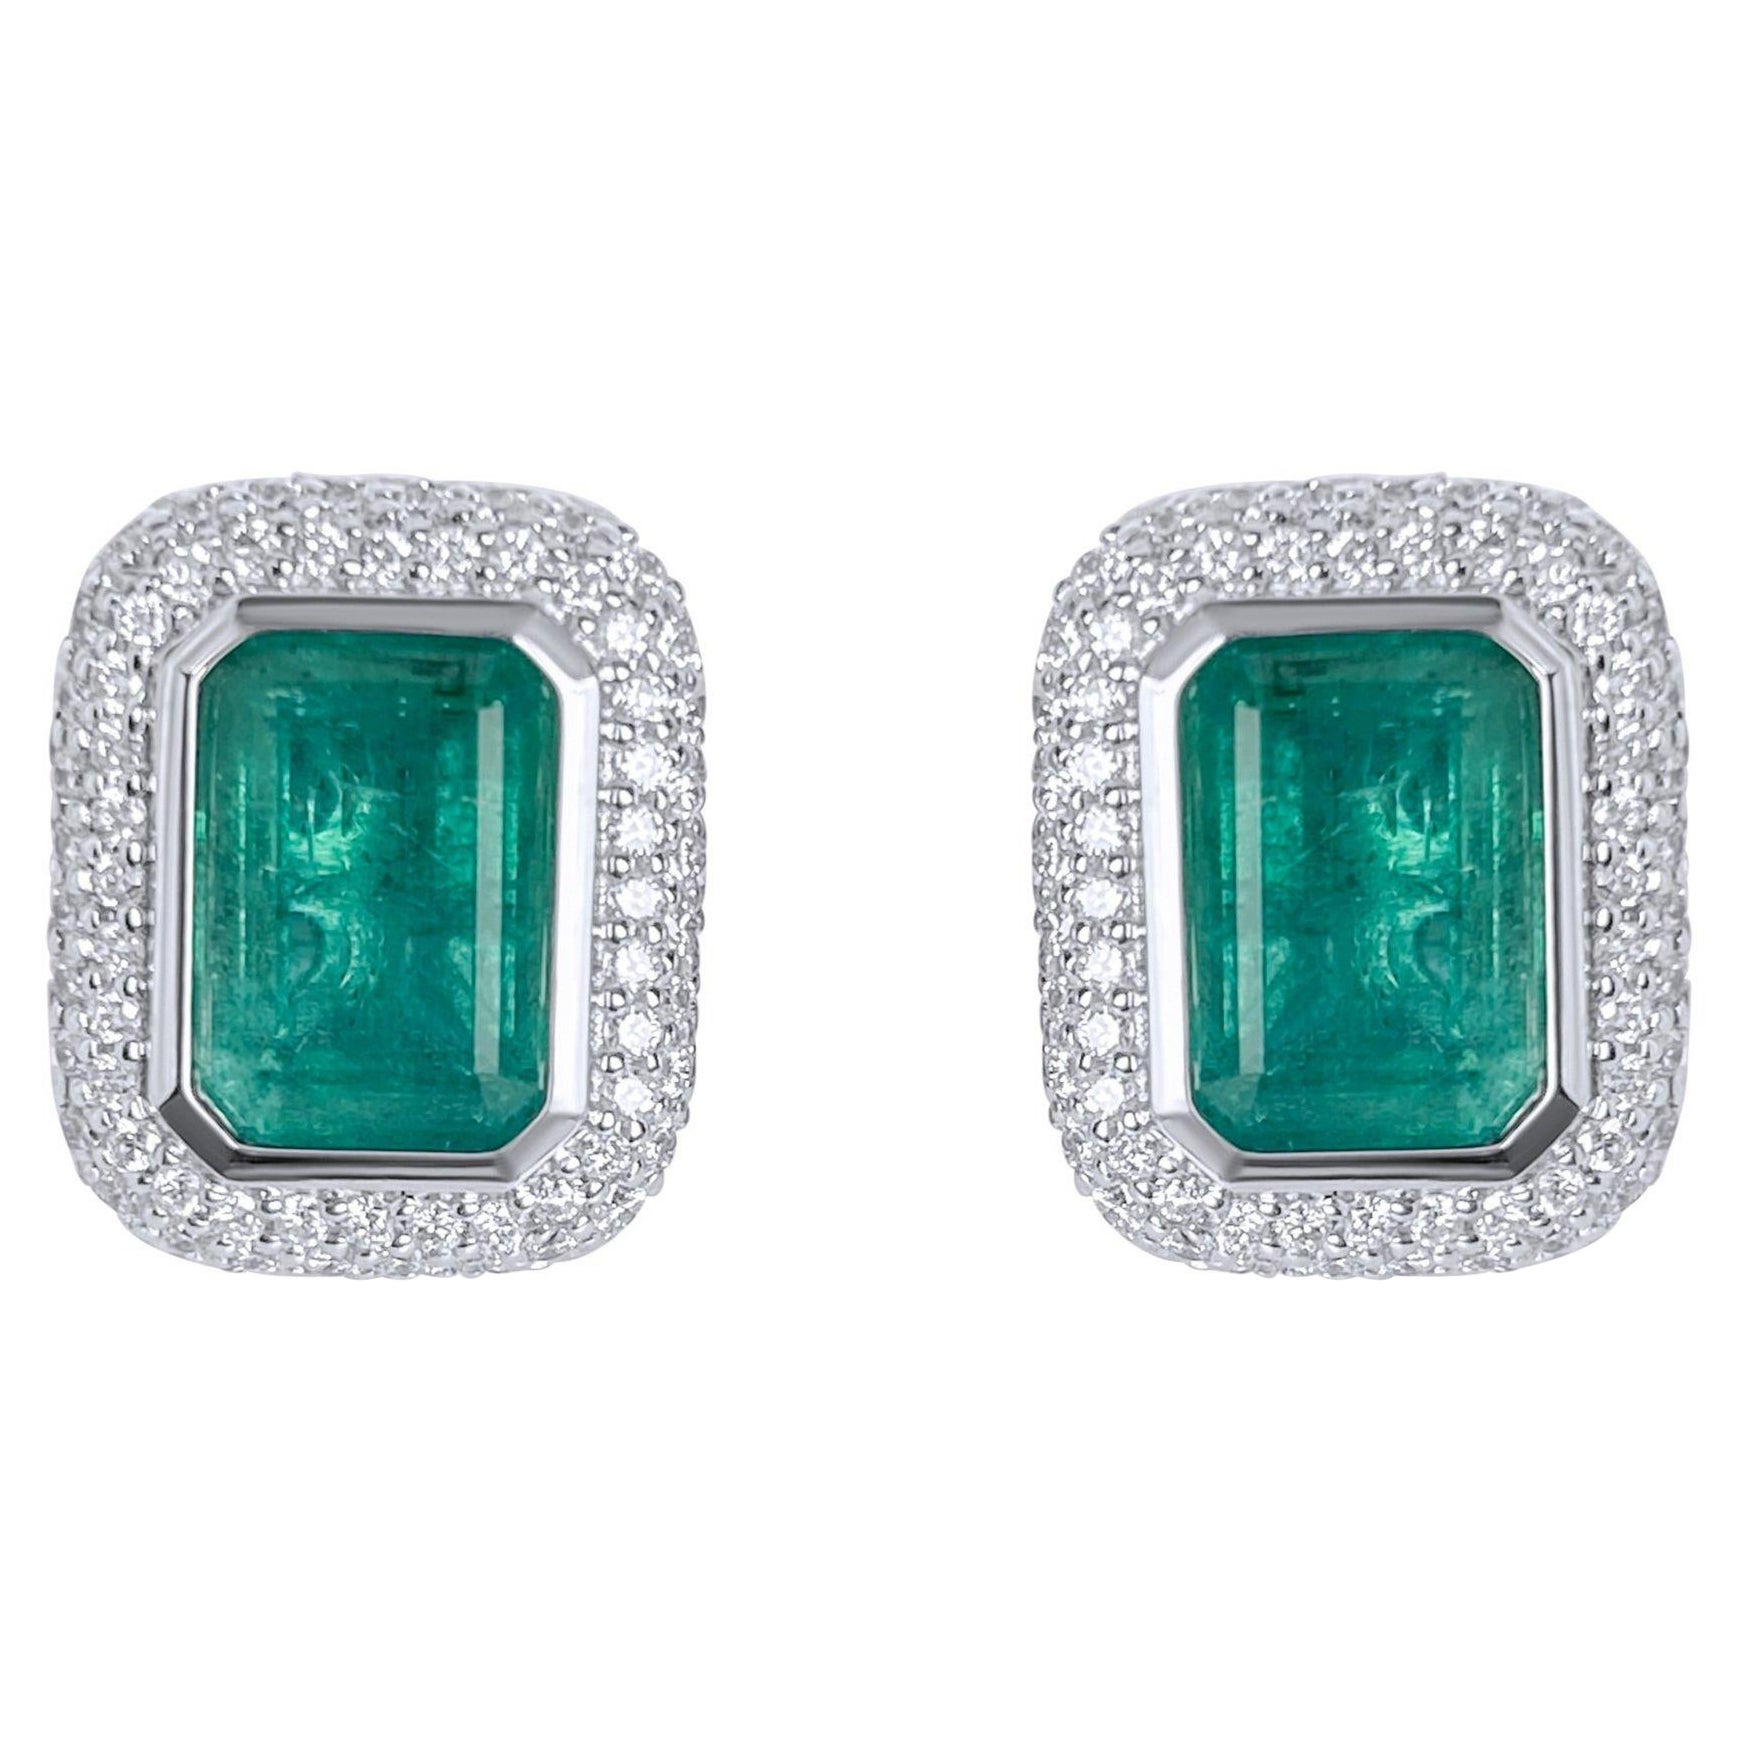 Lotus 5.5ct Emerald Cut Emerald Earrings with Blue Sapphire and Diamonds